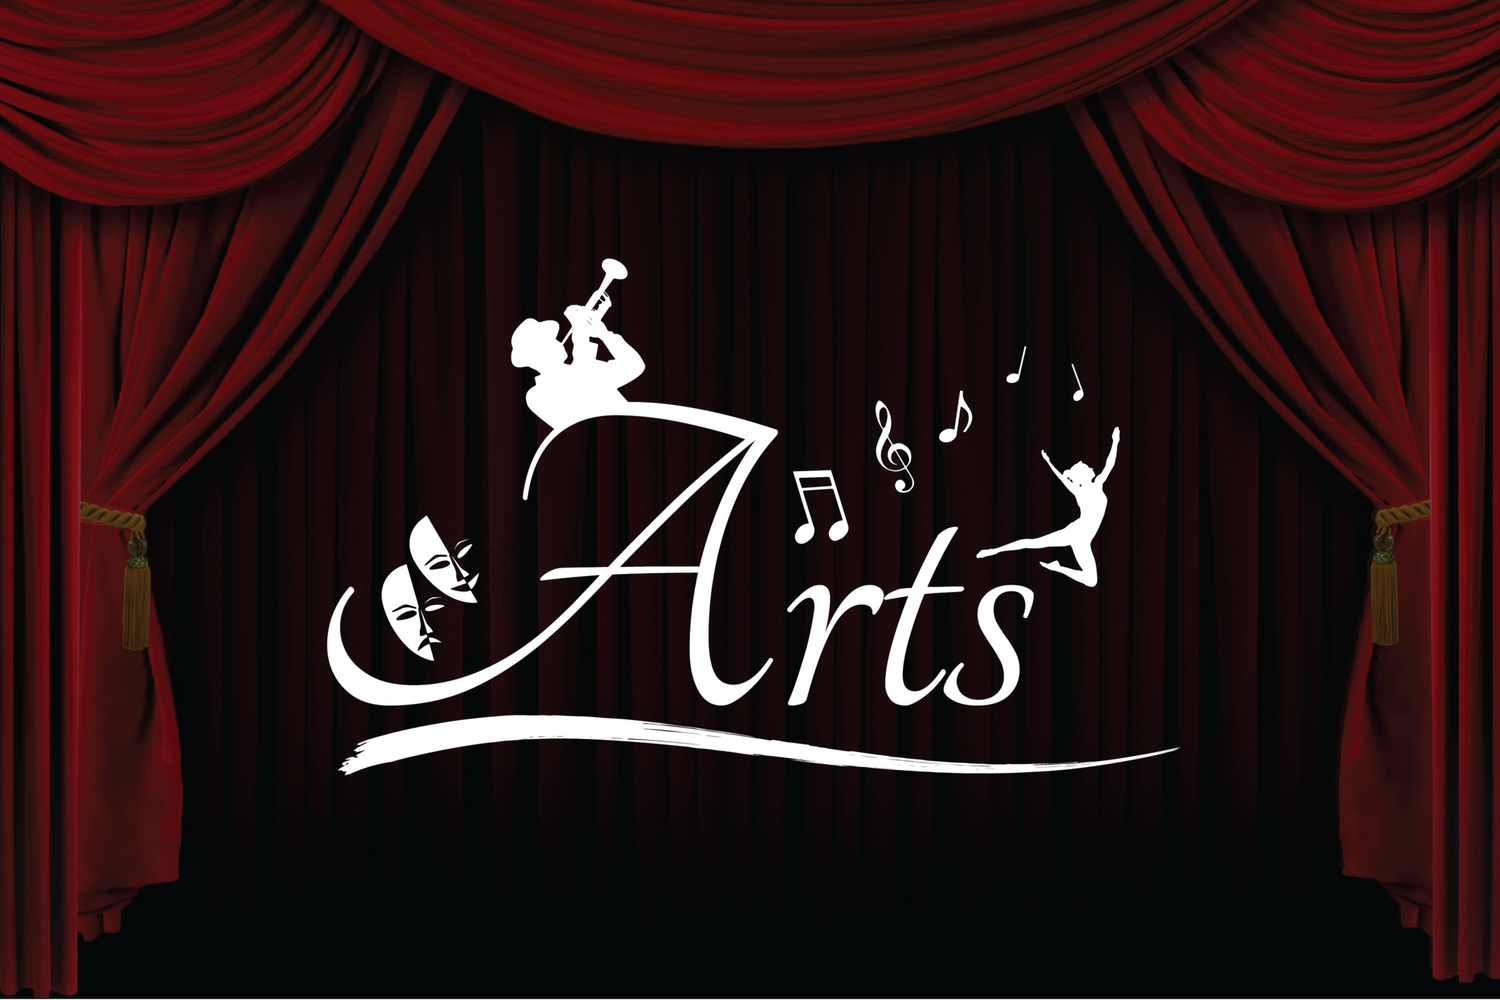 Introducing the Swaponz Blog Page: The Arts